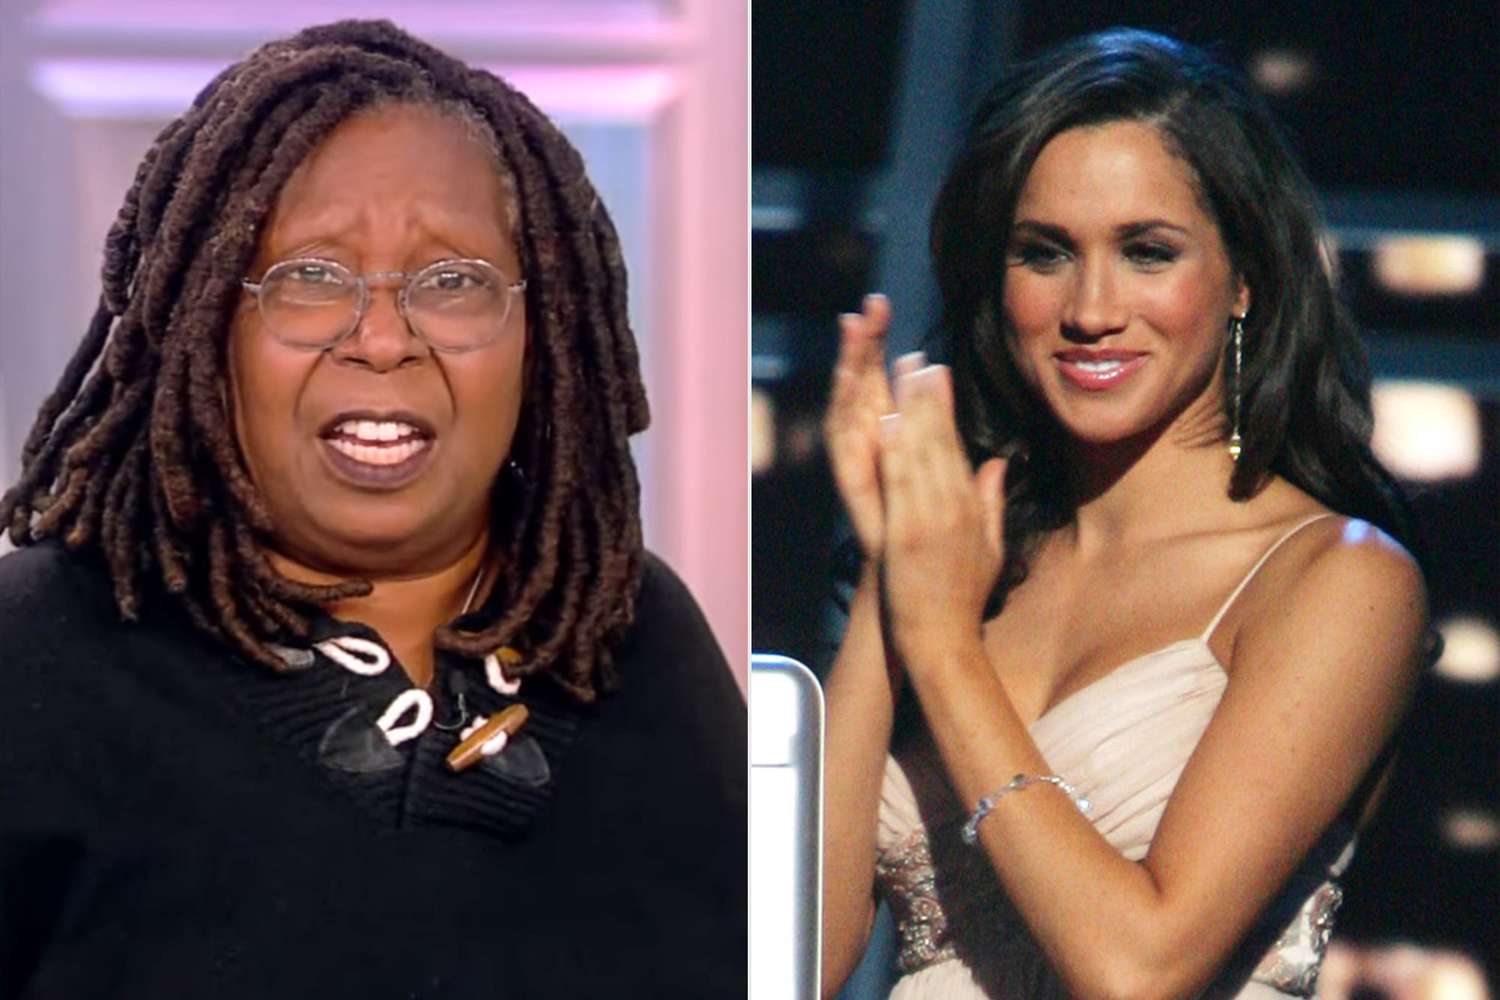 Whoopi Goldberg on The View; Meghan Markle on Deal of No Deal